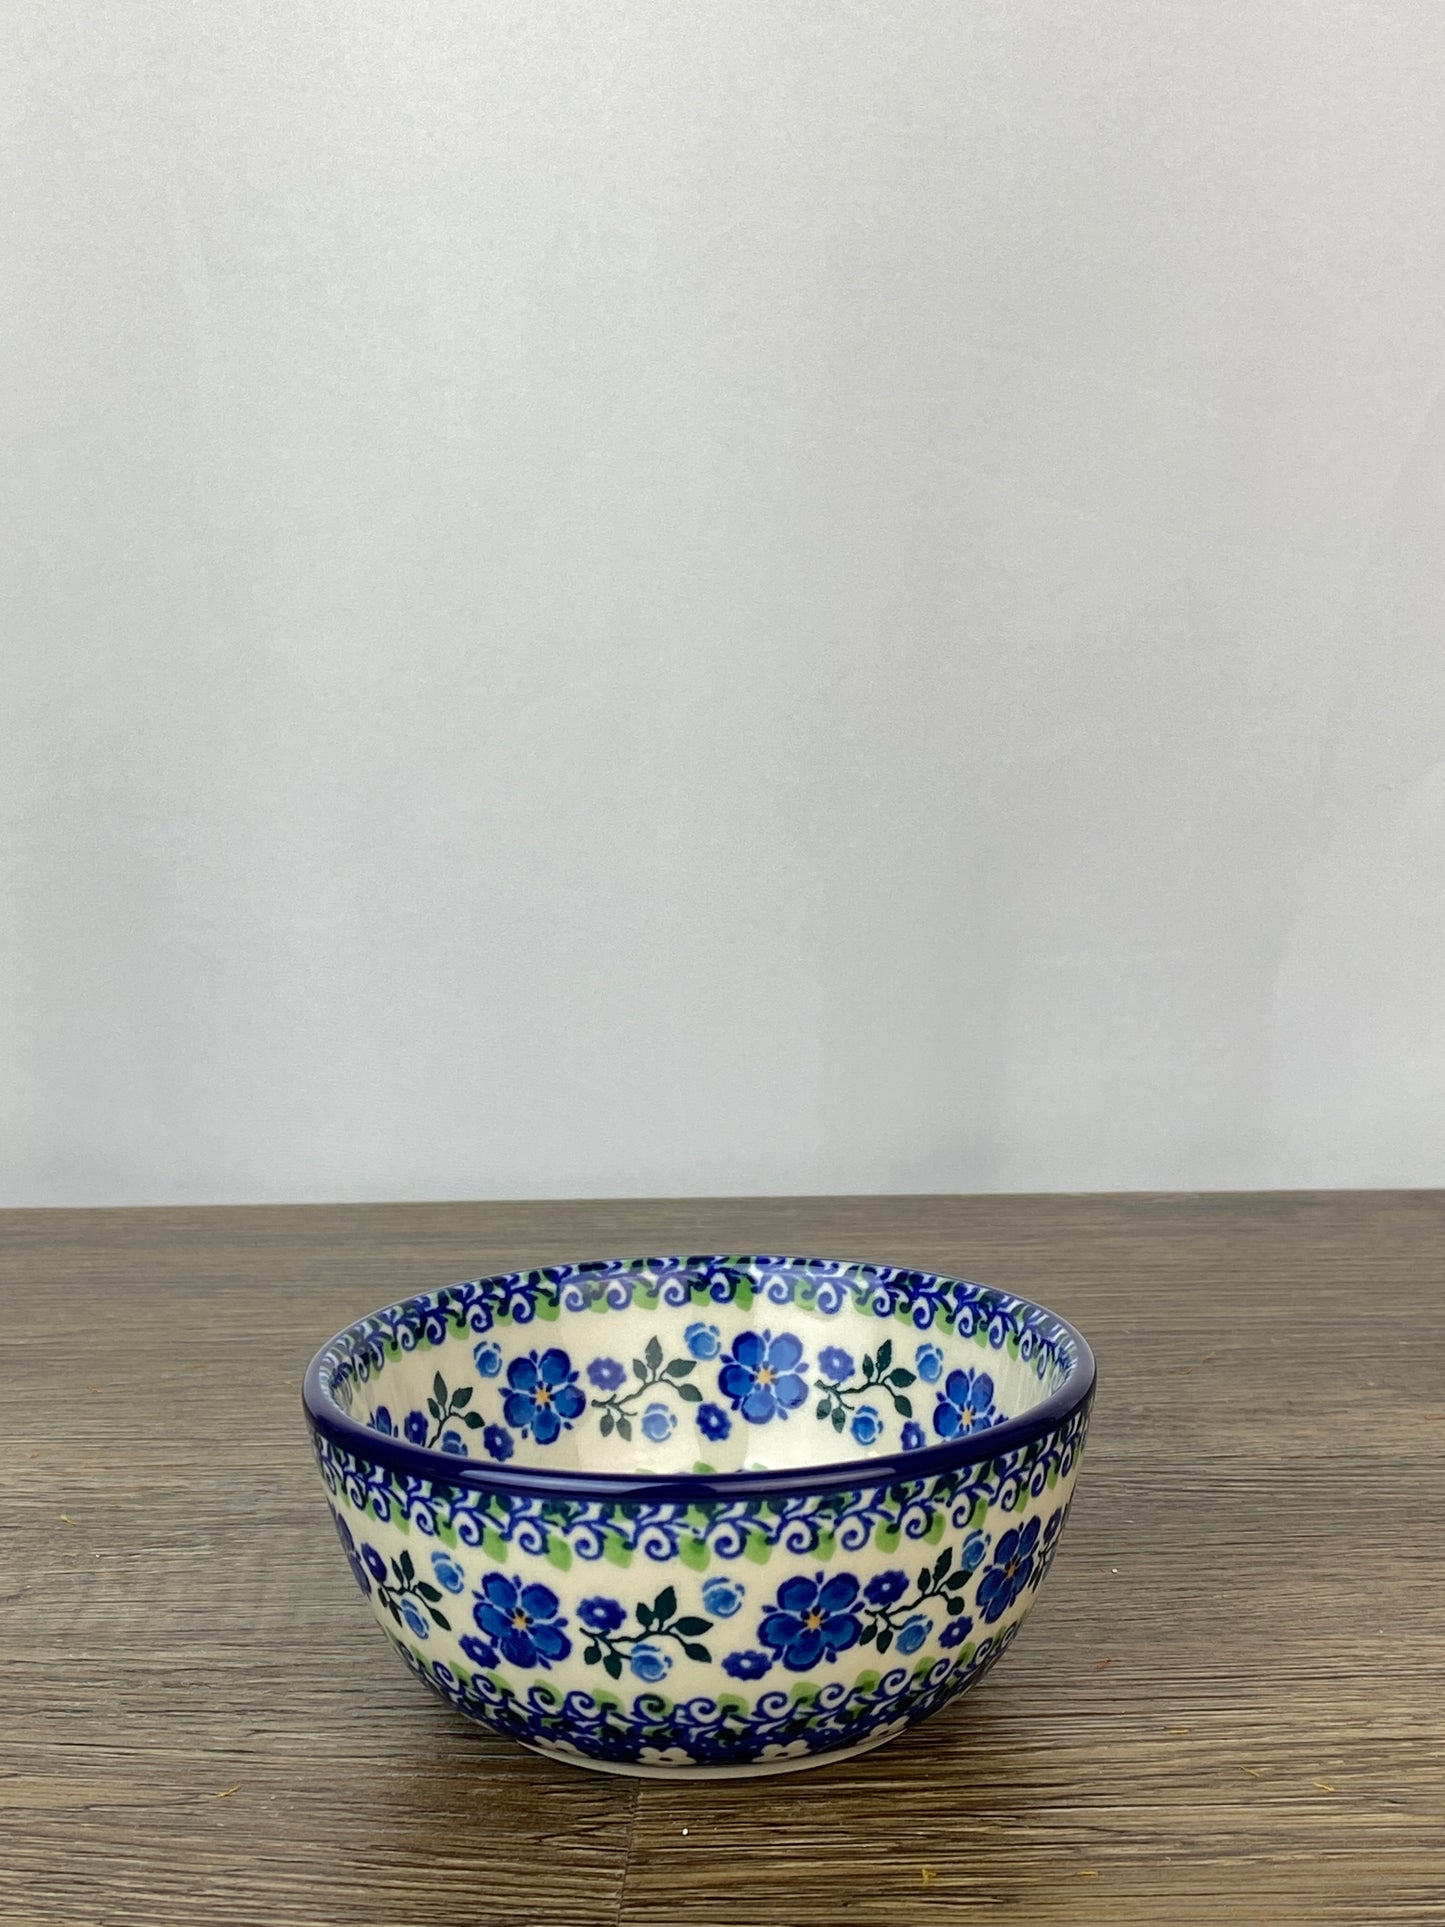 Small Cereal / Dessert Bowl - Shape 17 - Pattern 2251